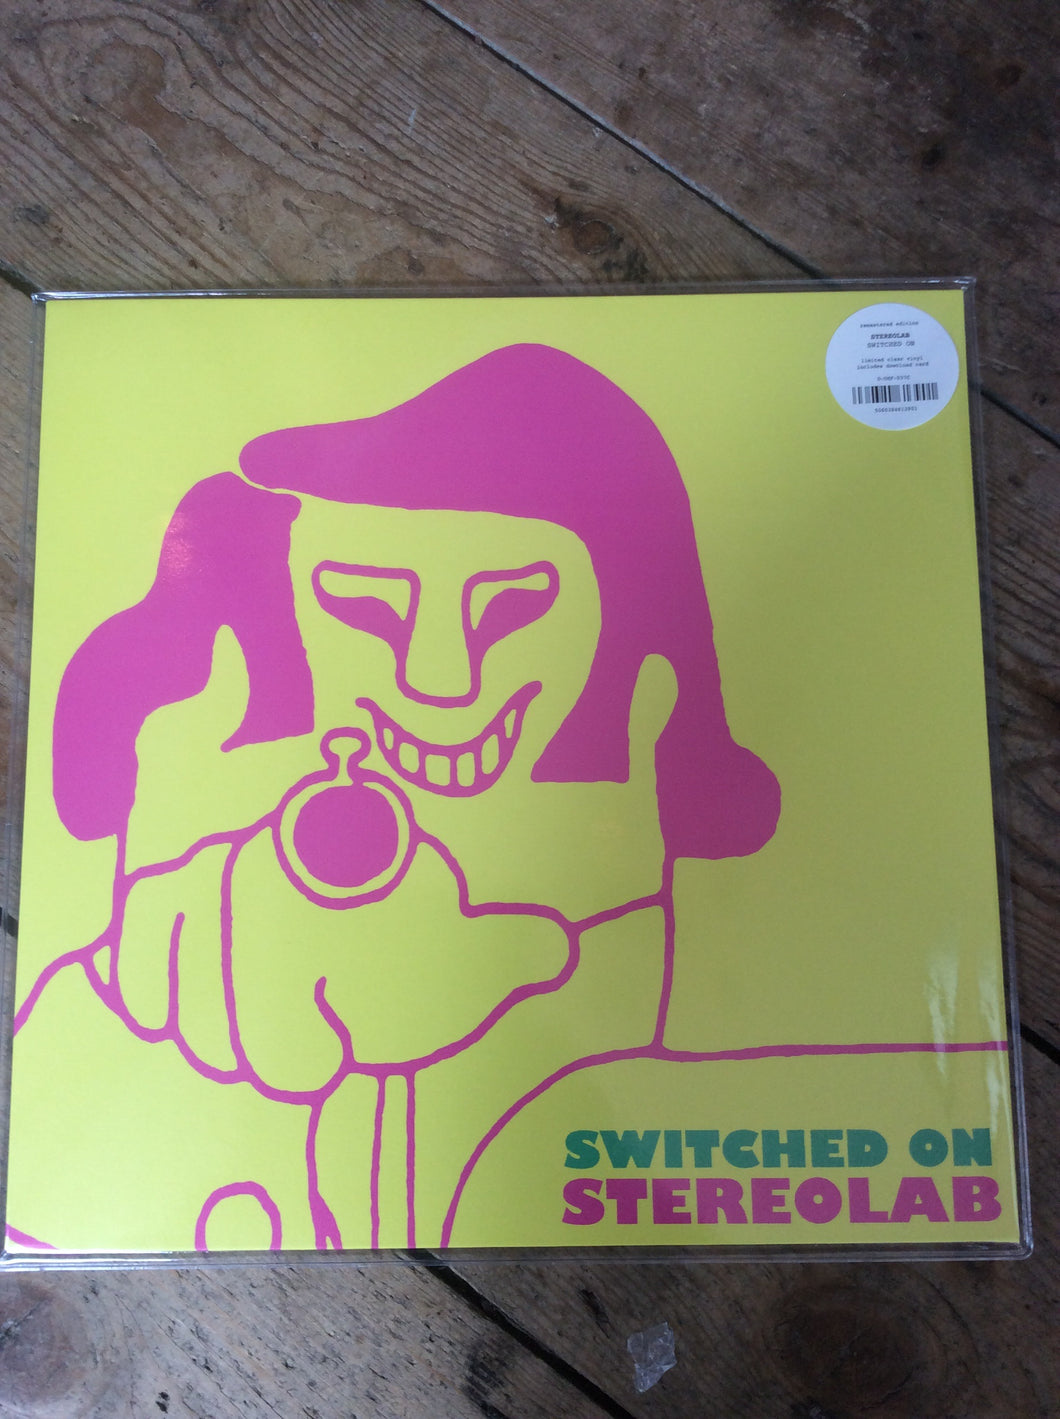 Stereolab	- Switched On